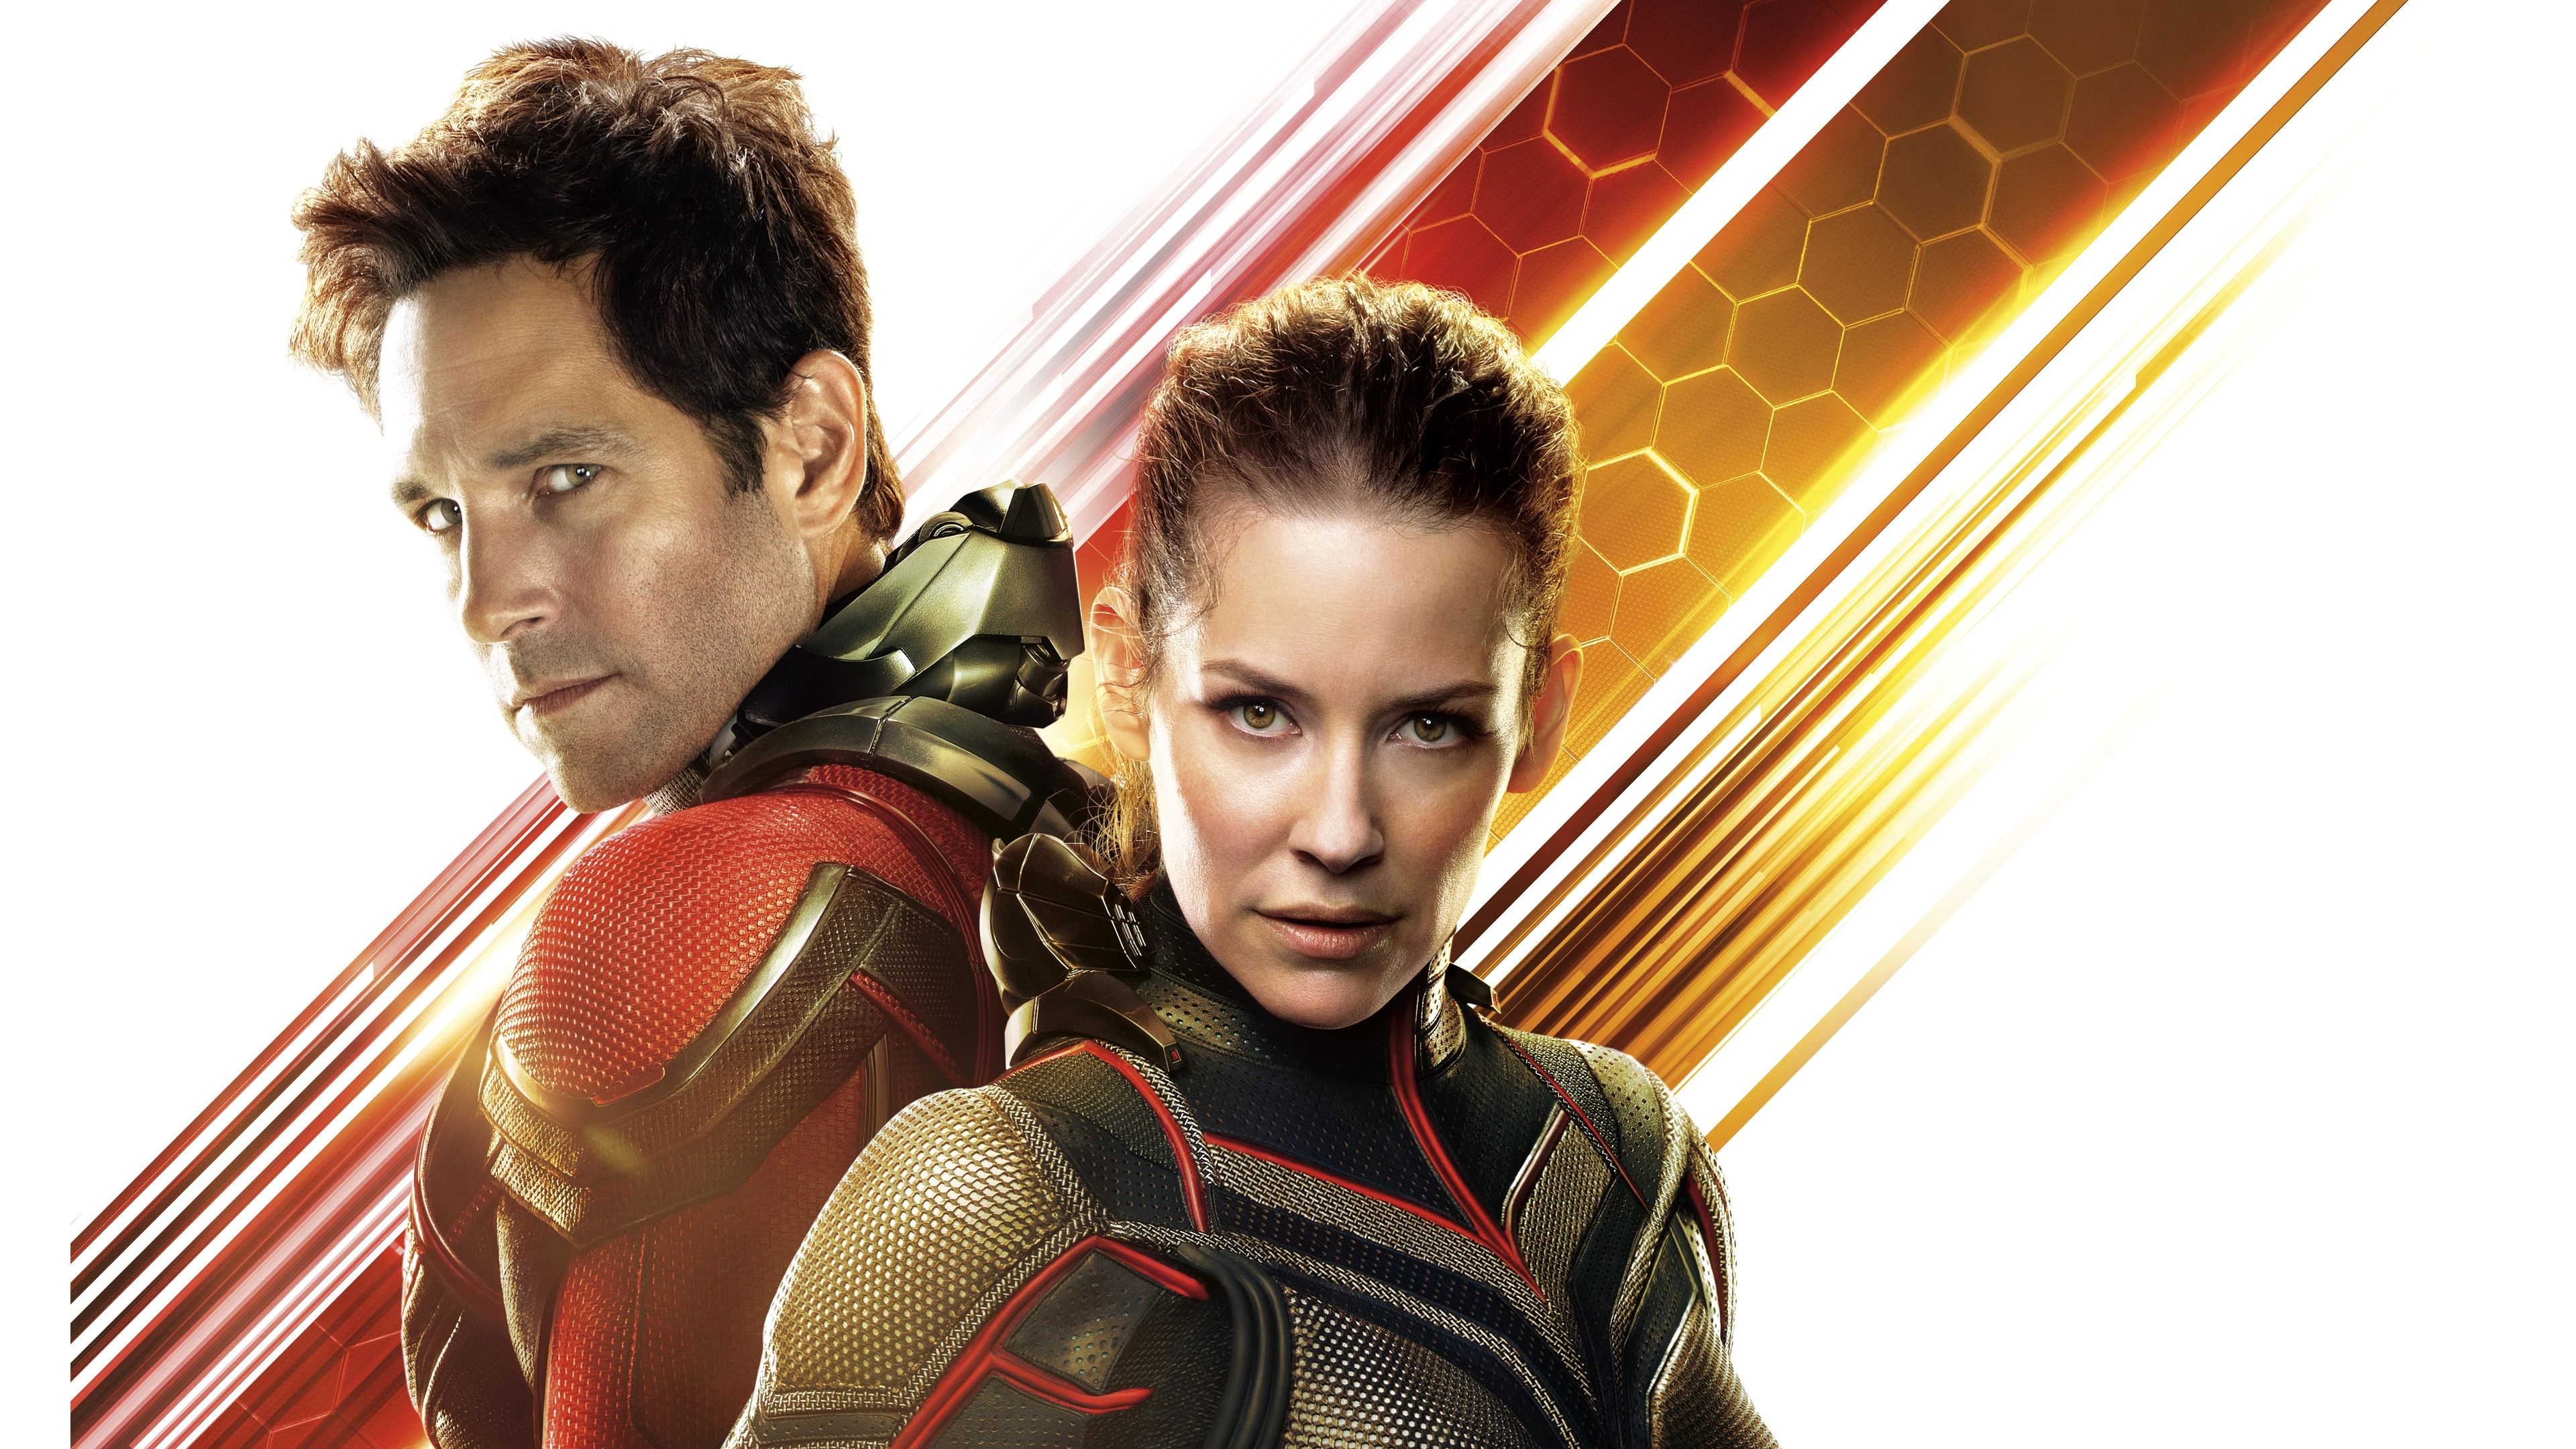 Ant-Man and the Wasp: Quantumania: Scott Lang as Ant-Man and Hope Pym as Wasp, Produced by Marvel Studios. 3840x2160 4K Background.